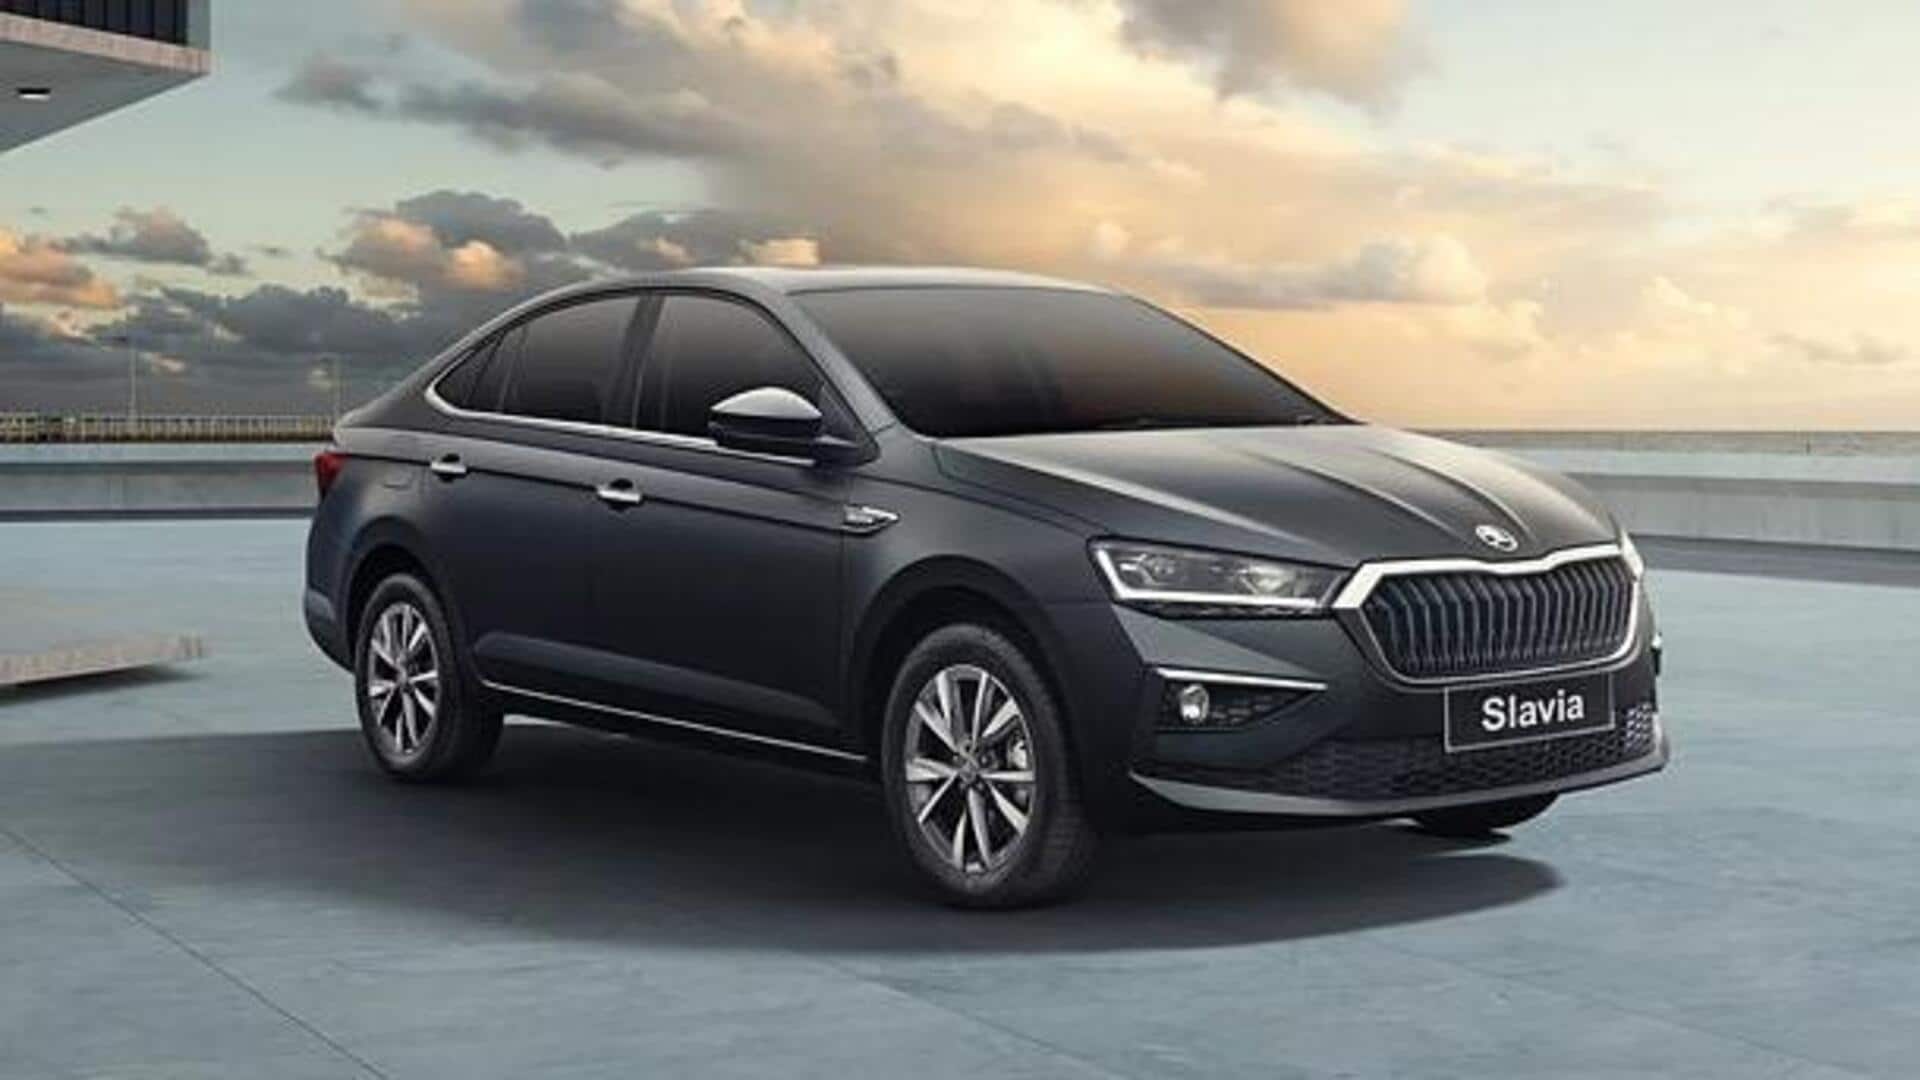 SKODA SLAVIA Matte Edition launched at Rs. 15.52 lakh